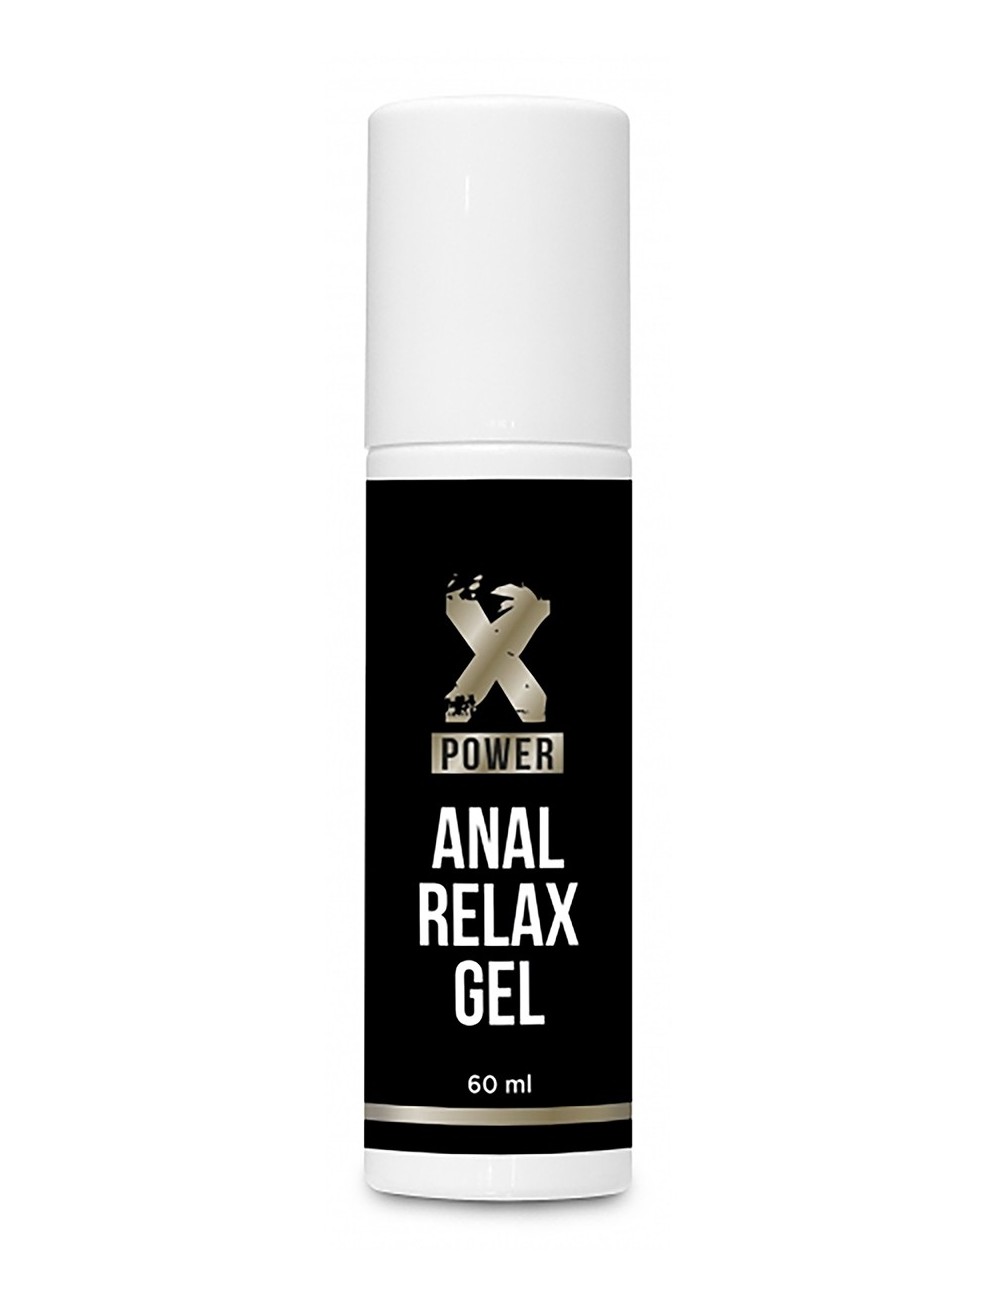 Anal Relax Gel 60 ml - XPOWER